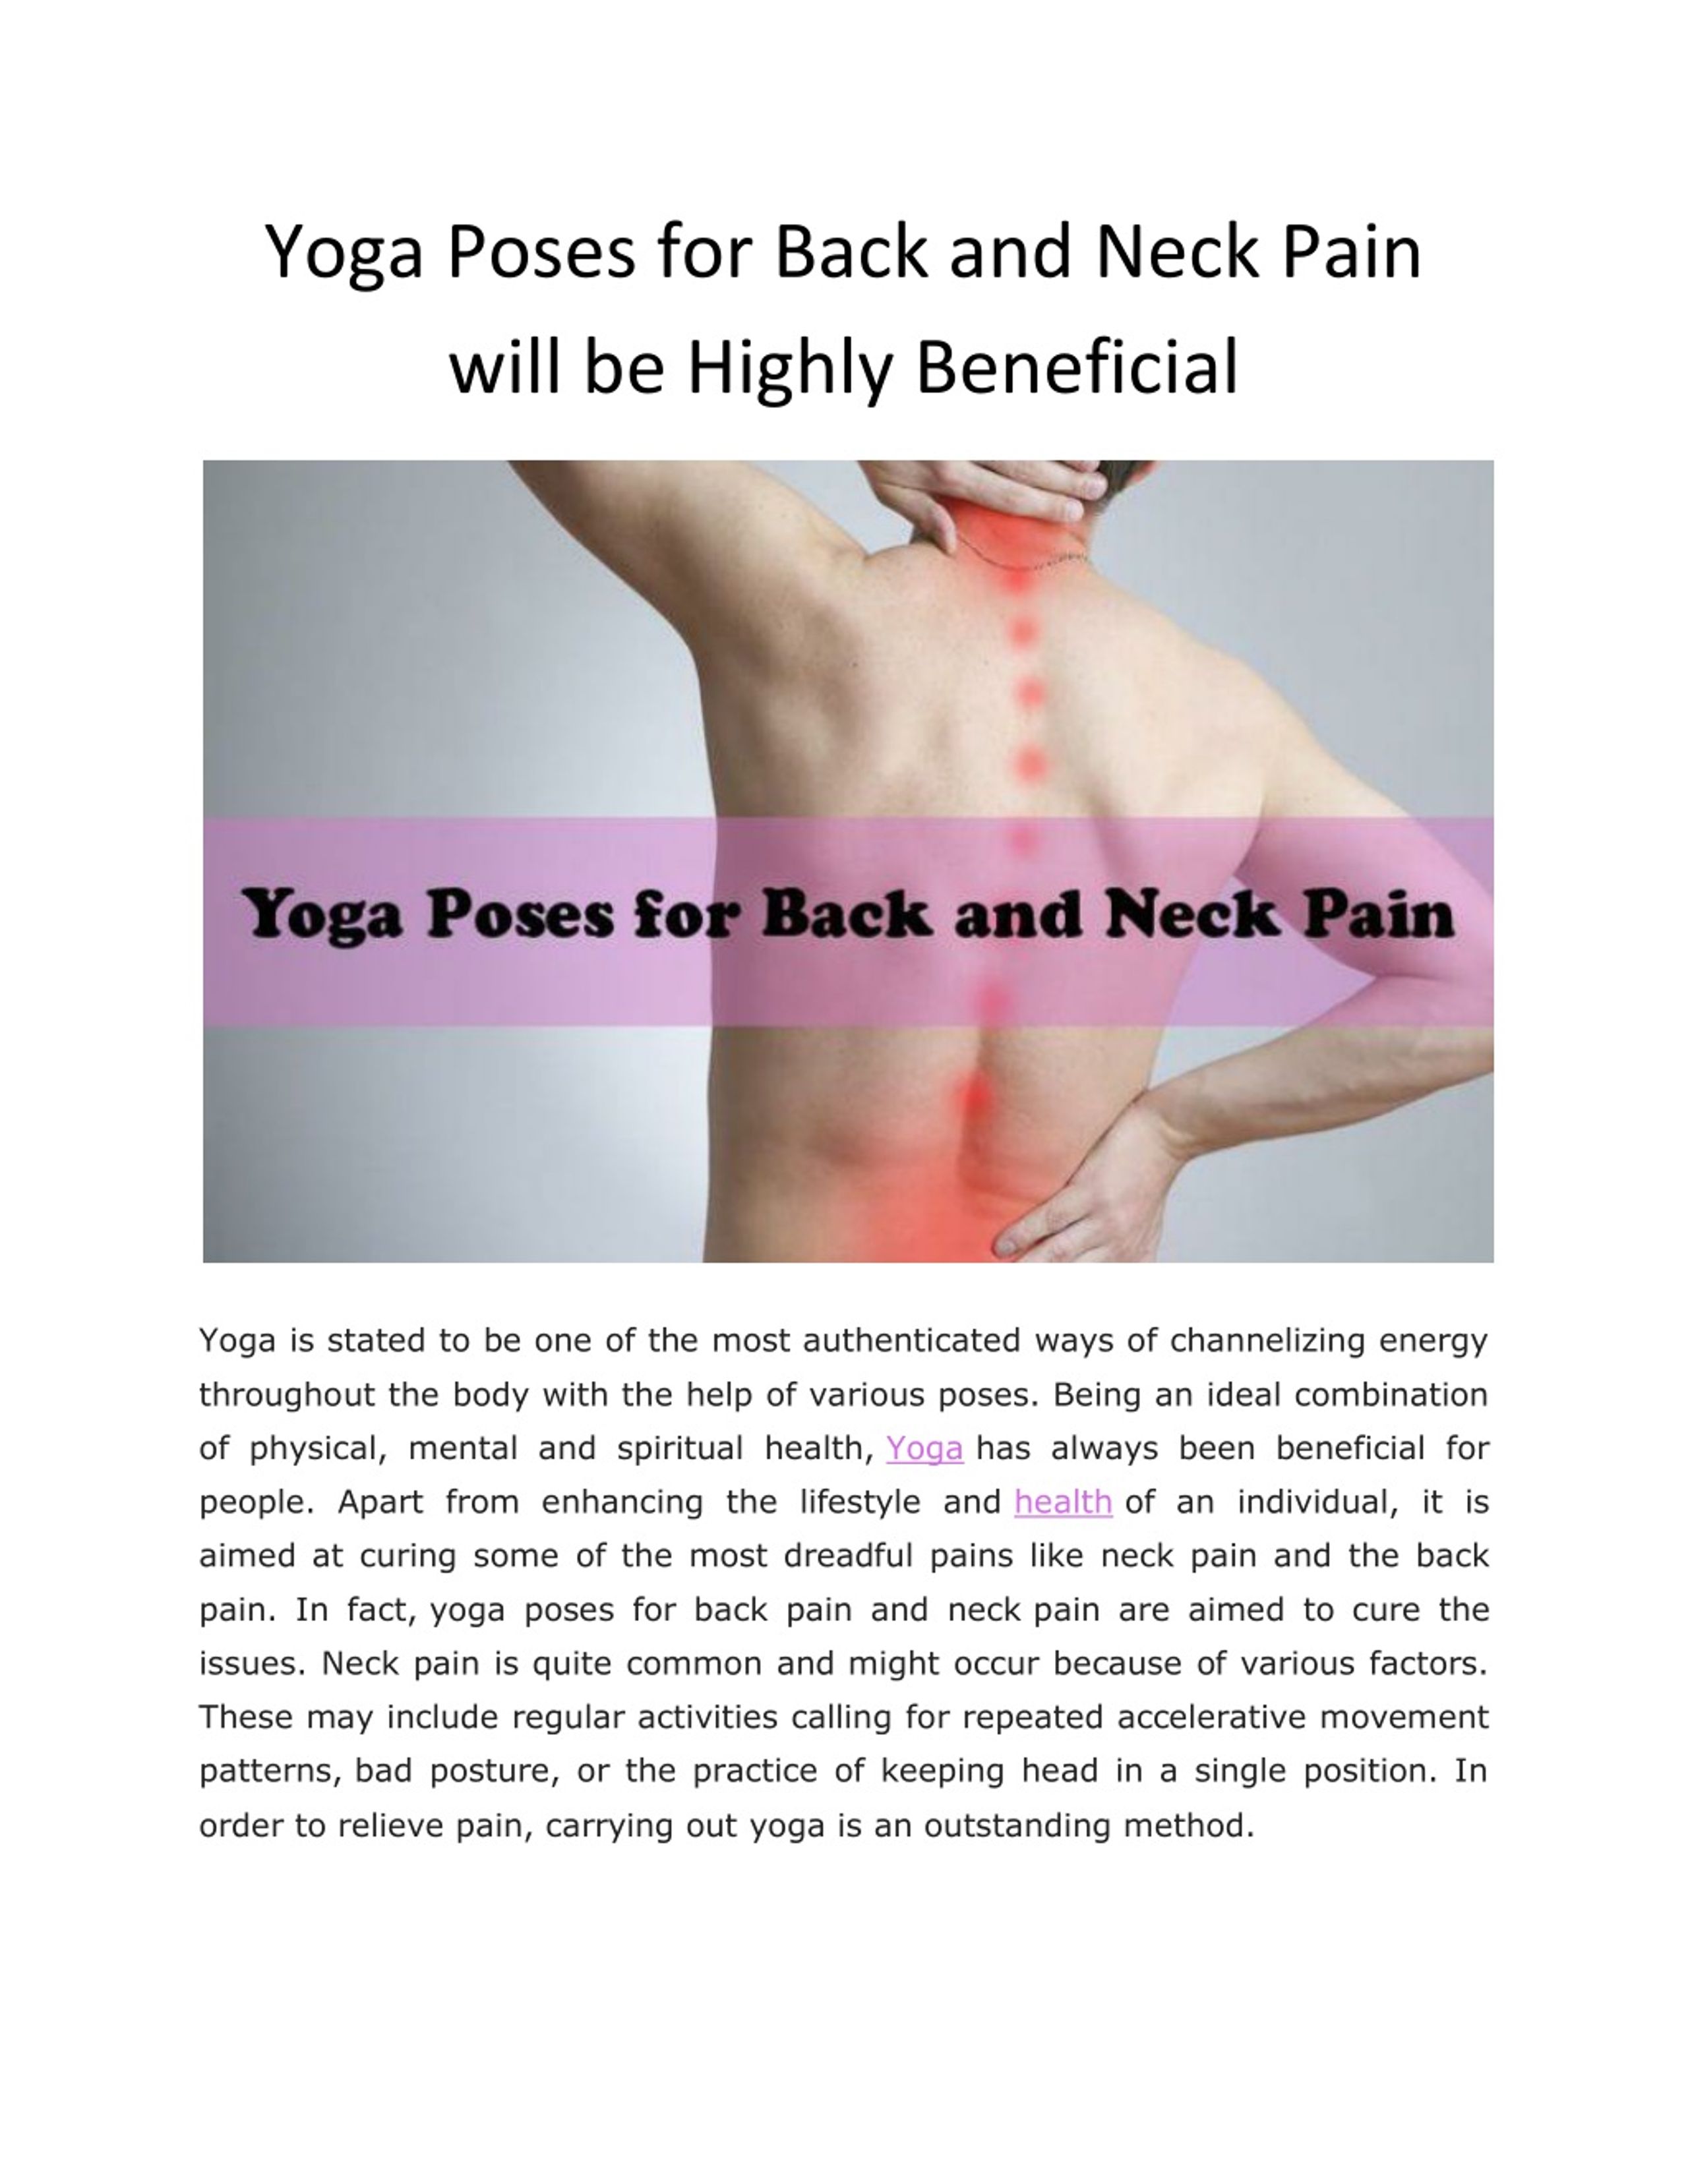 How yoga can help ease your pain – Canadian Chiropractic Association (CCA)